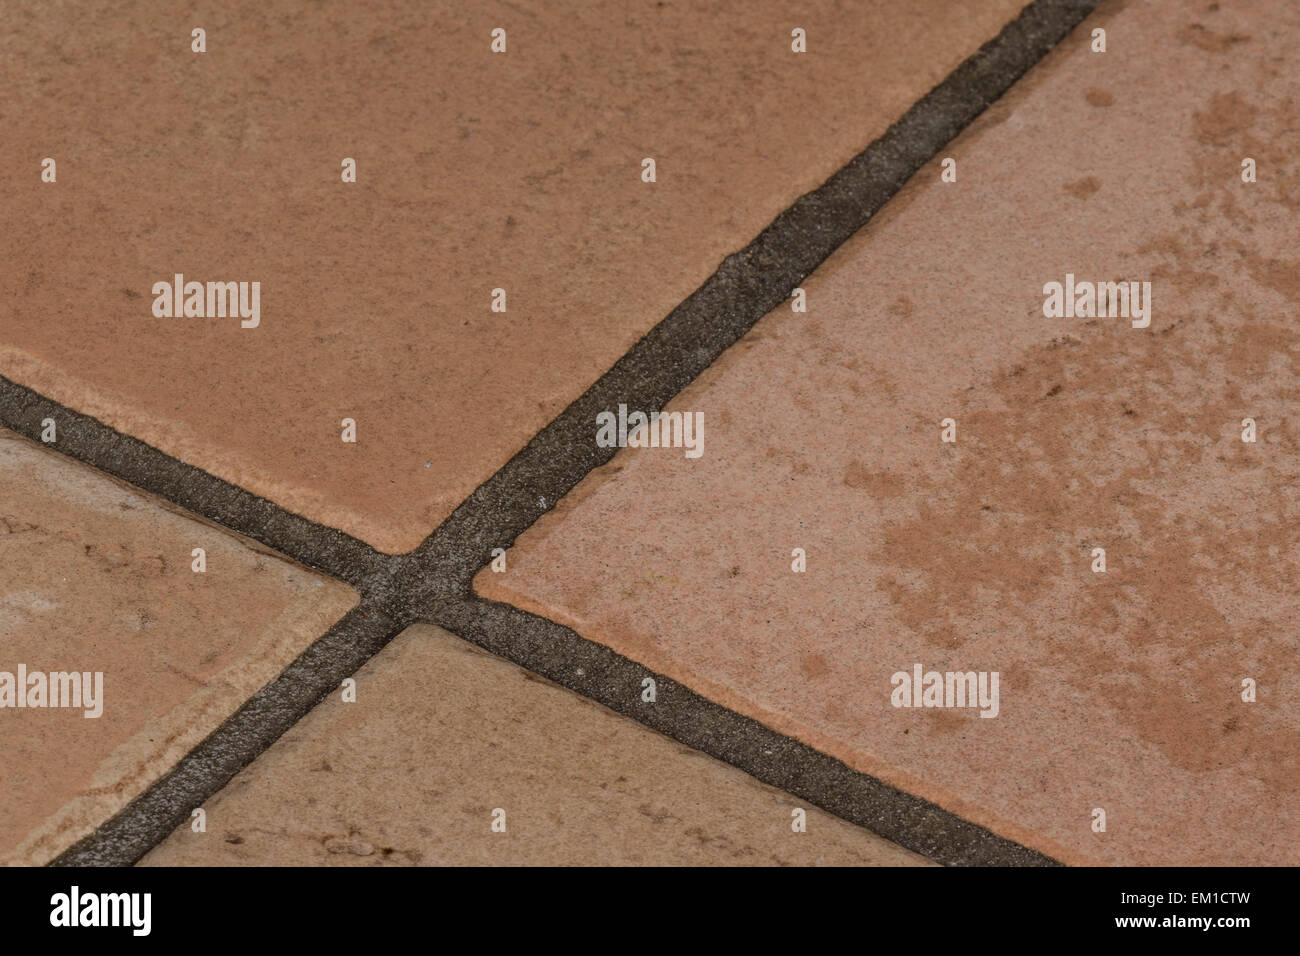 Ceramic tiles and grout Stock Photo